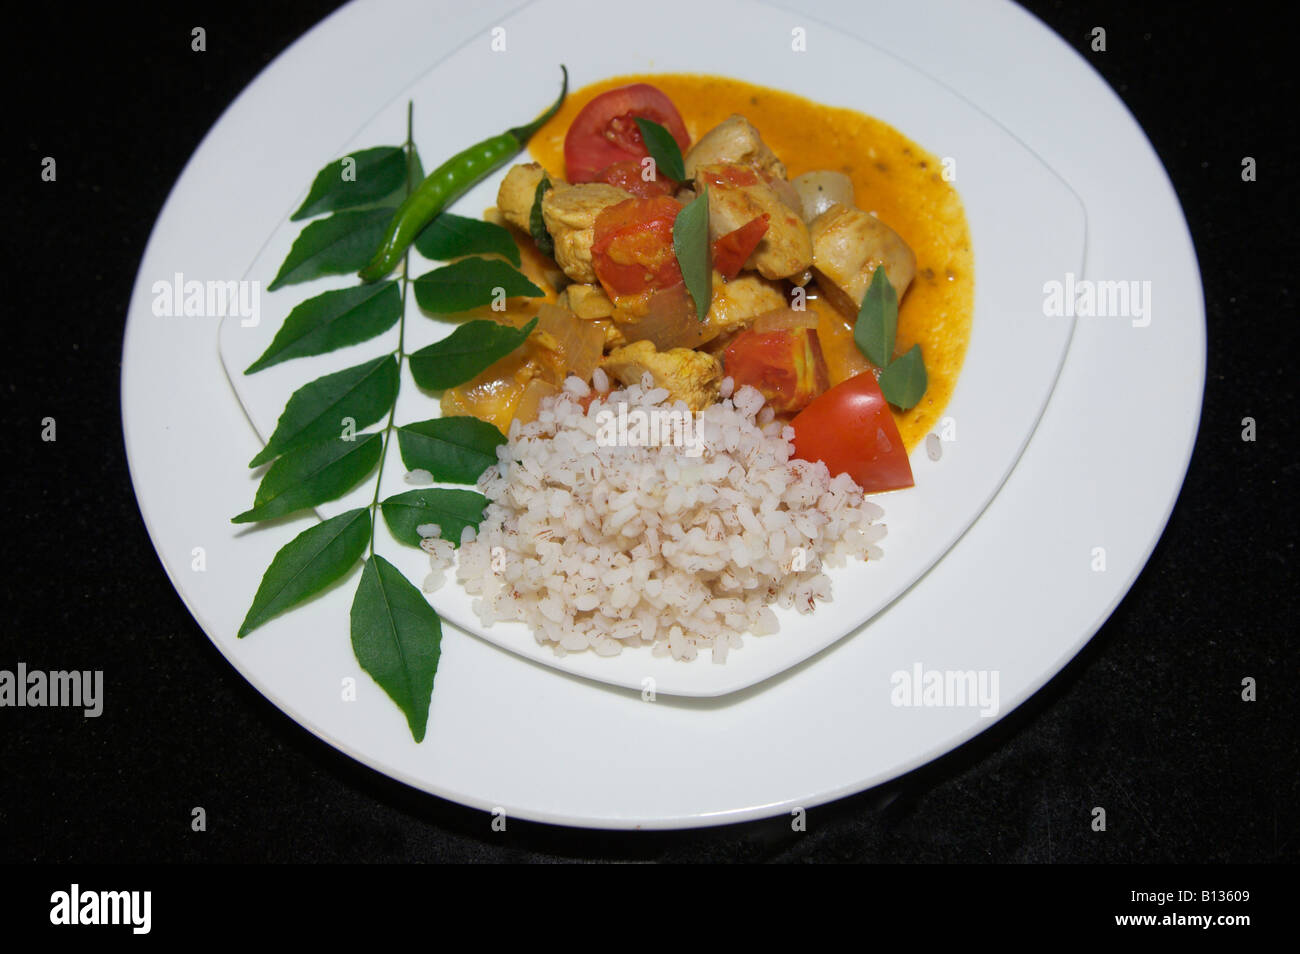 Plate of chicken curry Indian food with rice and garnish ready to serve Stock Photo